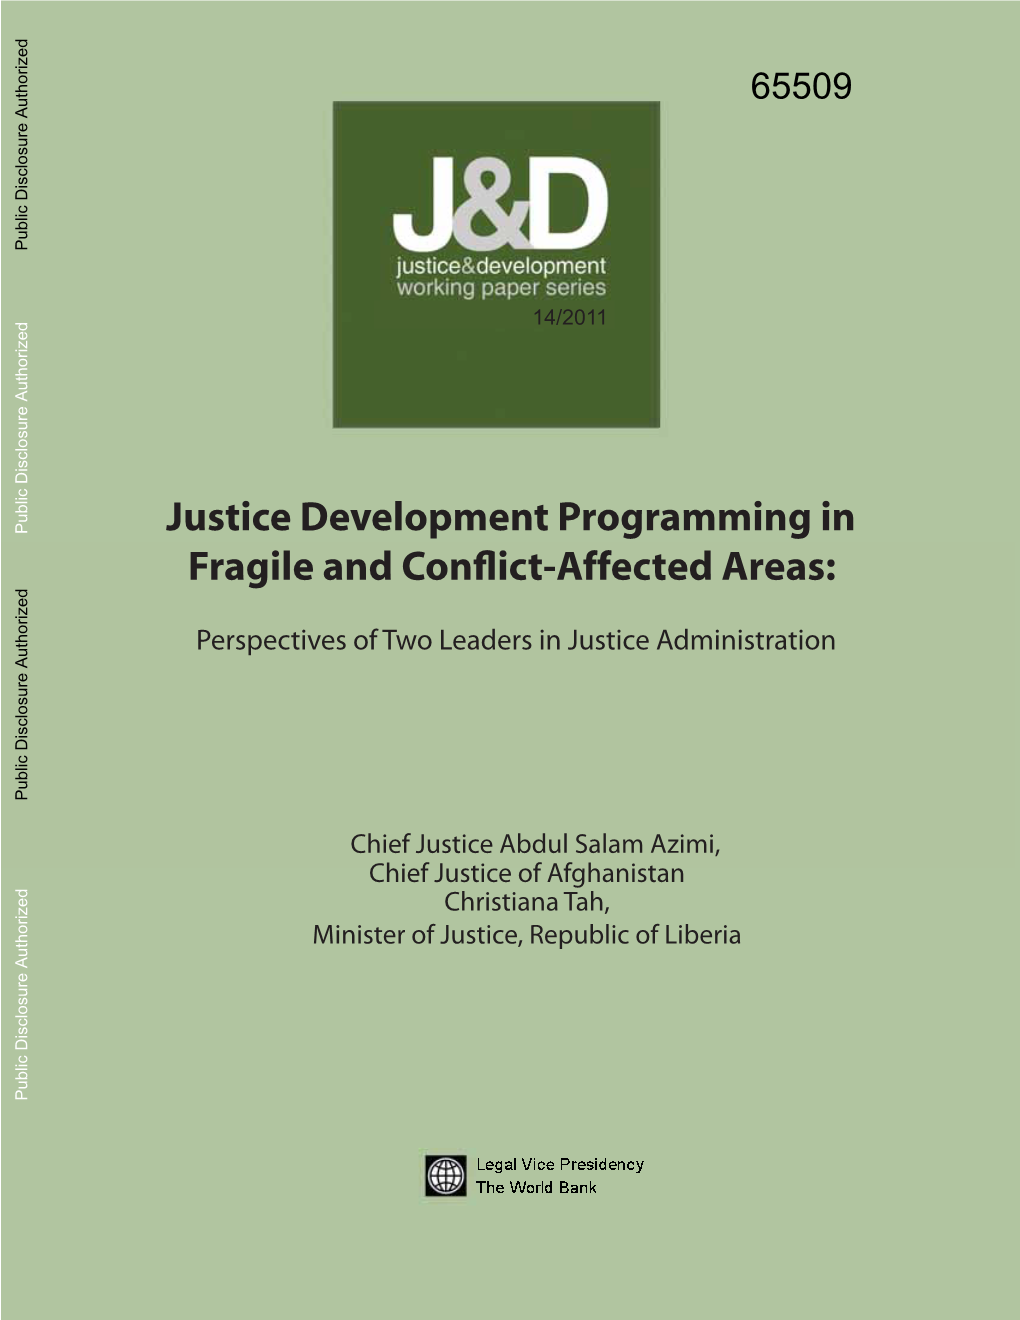 The Justice System As the Most Important—Though Time Consuming—Strategy for Overcoming Poor Judicial Performance and Reducing Corruption in the Justice System